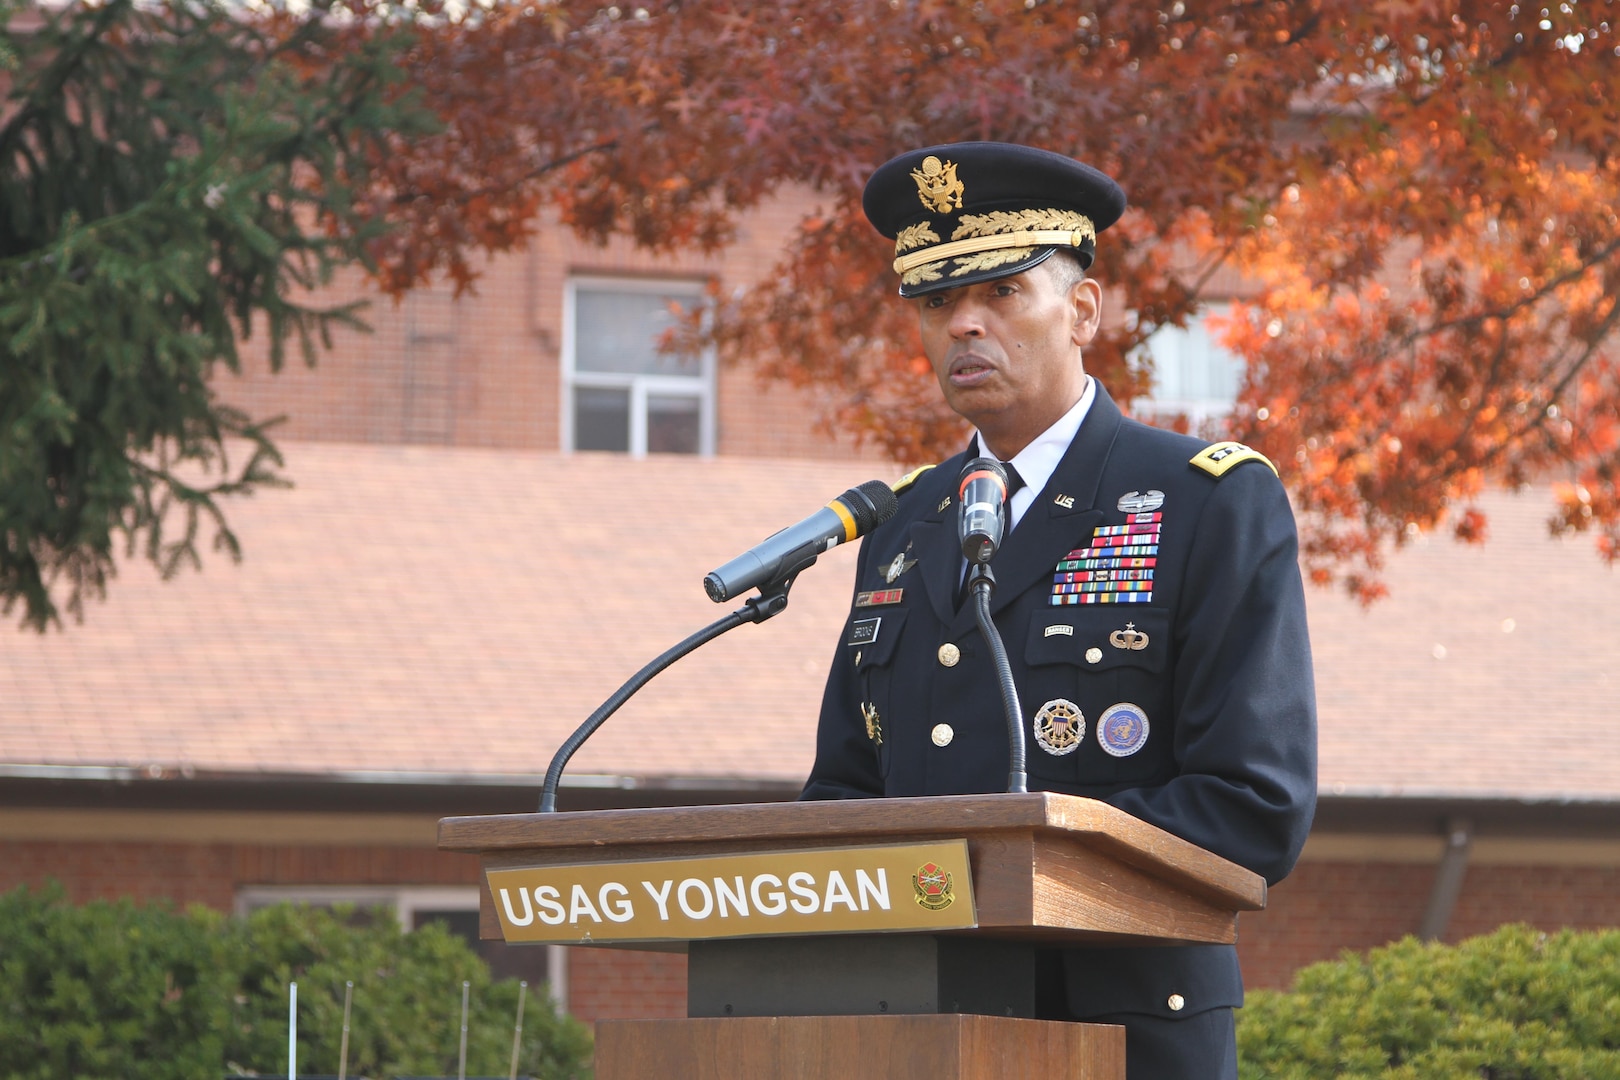 General Vincent K. Brooks, commander of United Nations Command, Combined Forces Command, and U.S. Forces Korea speaks during the Veterans Day ceremony at the Eighth Army War Memorial to commemorate war veterans who have served in the U.S. Armed Forces, Yongsan, Republic of Korea, Nov. 11, 2016.